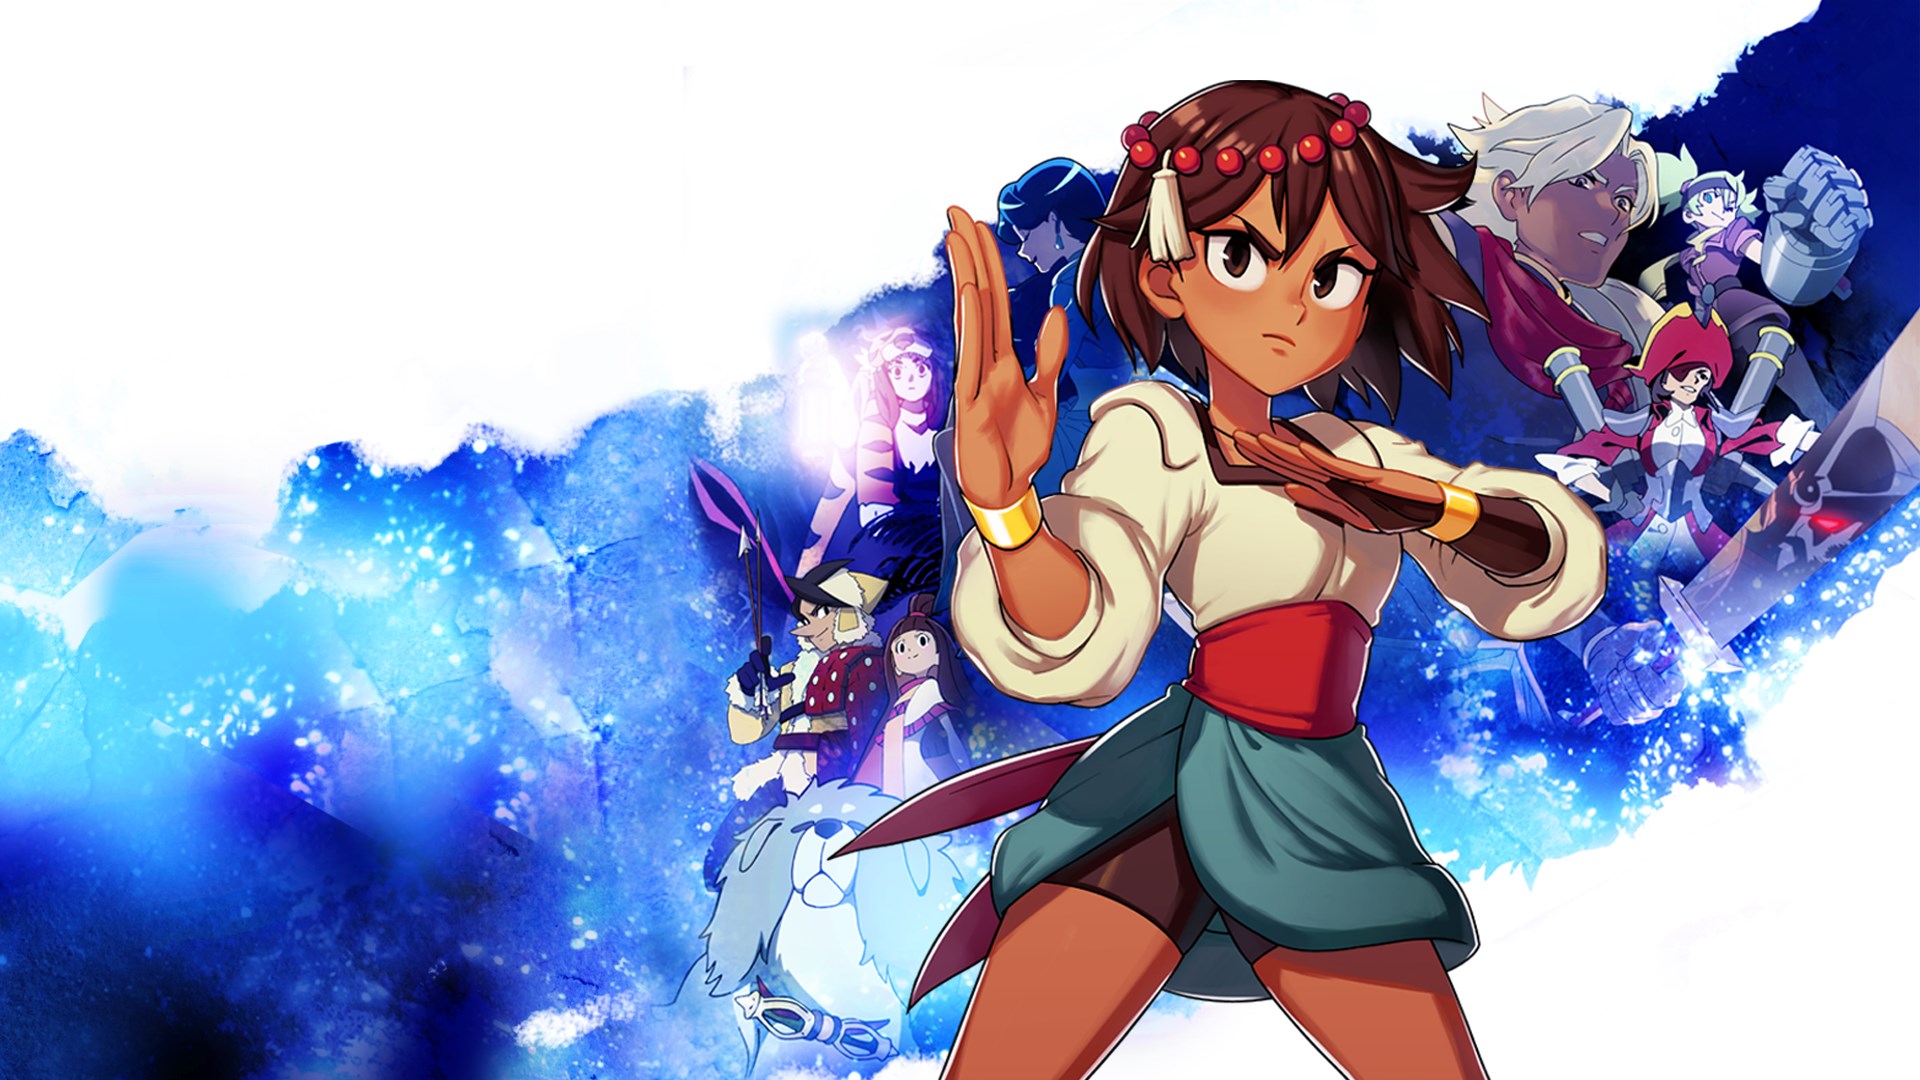 505 games игры. Игра Indivisible. Indivisible (ps4). Indivisible (2019).